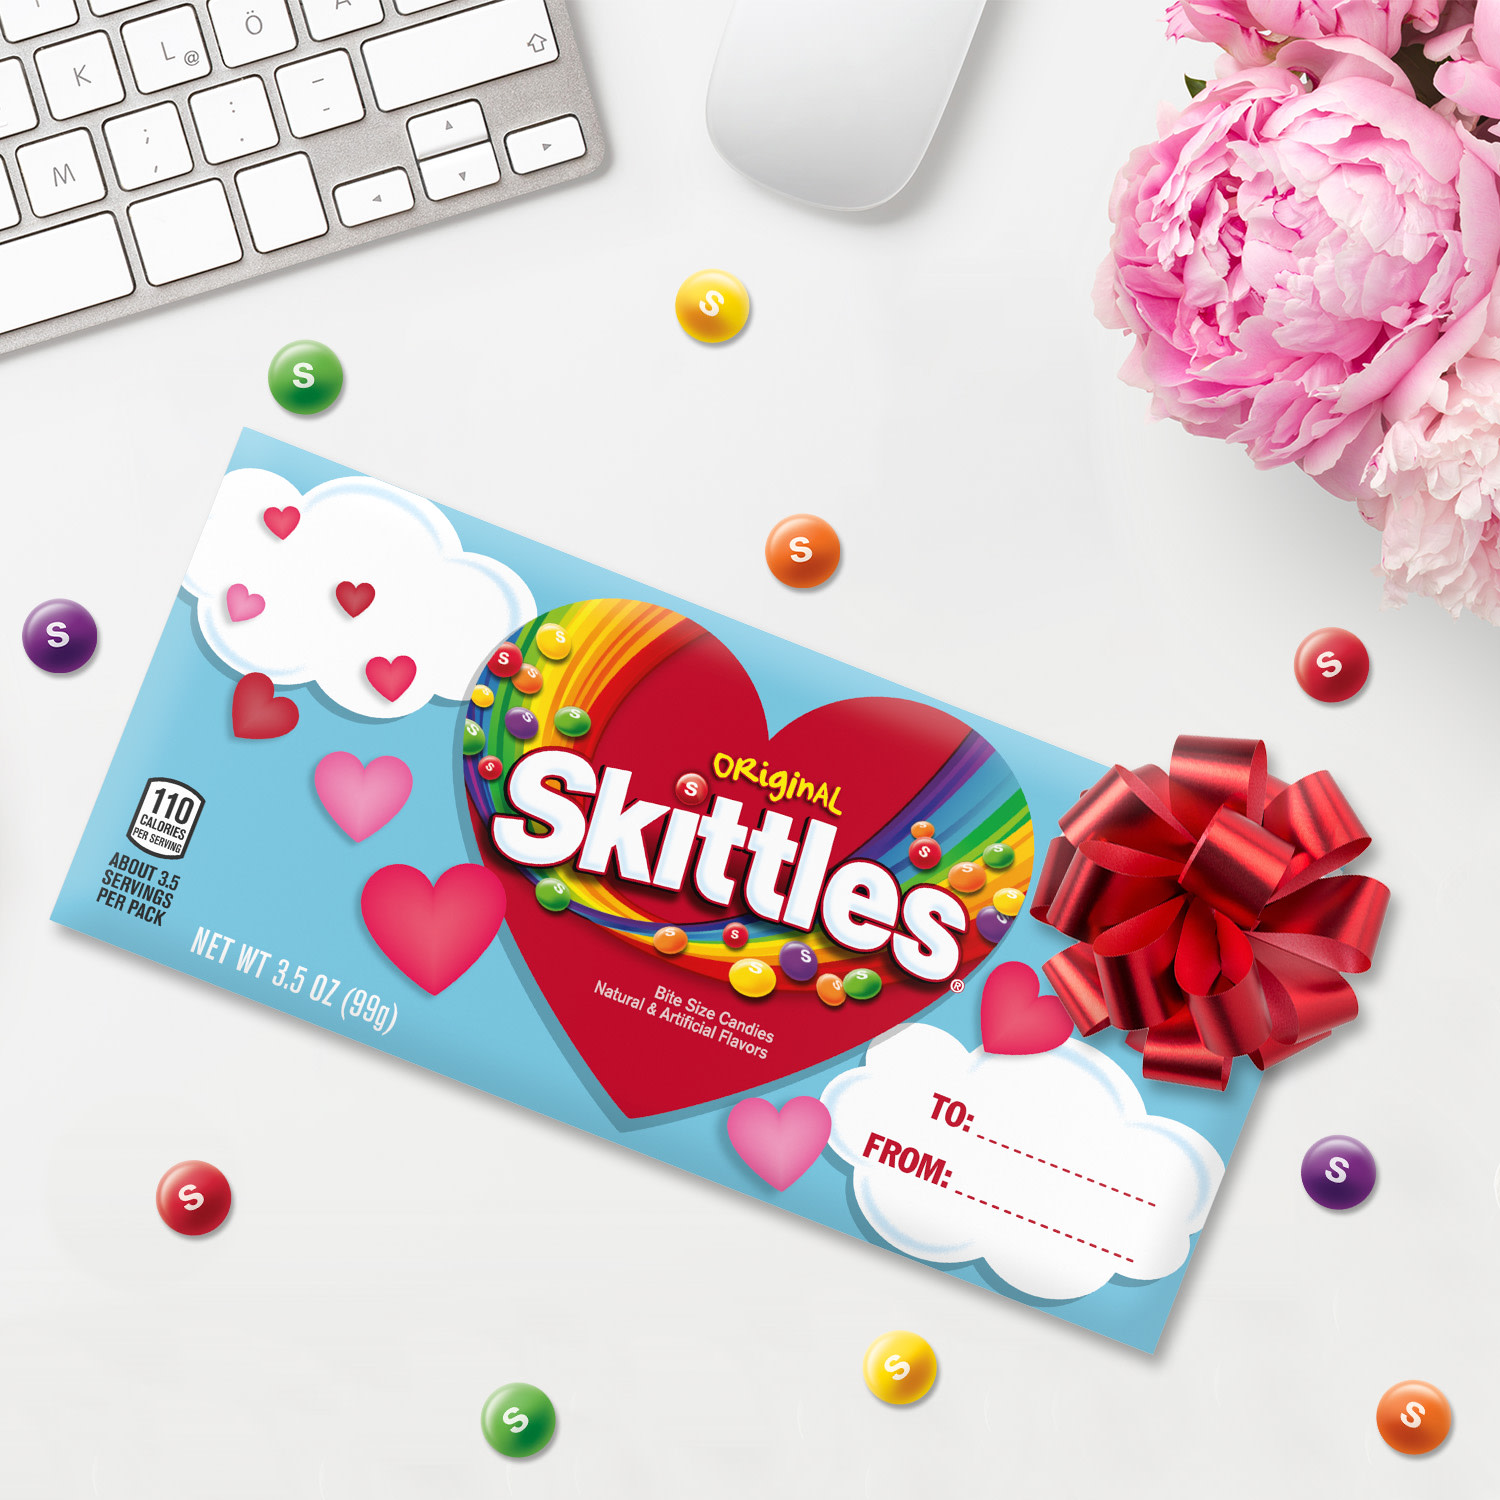 Skittles Original Chewy Candy Valentines Candy Box - 3.5 oz - image 5 of 13